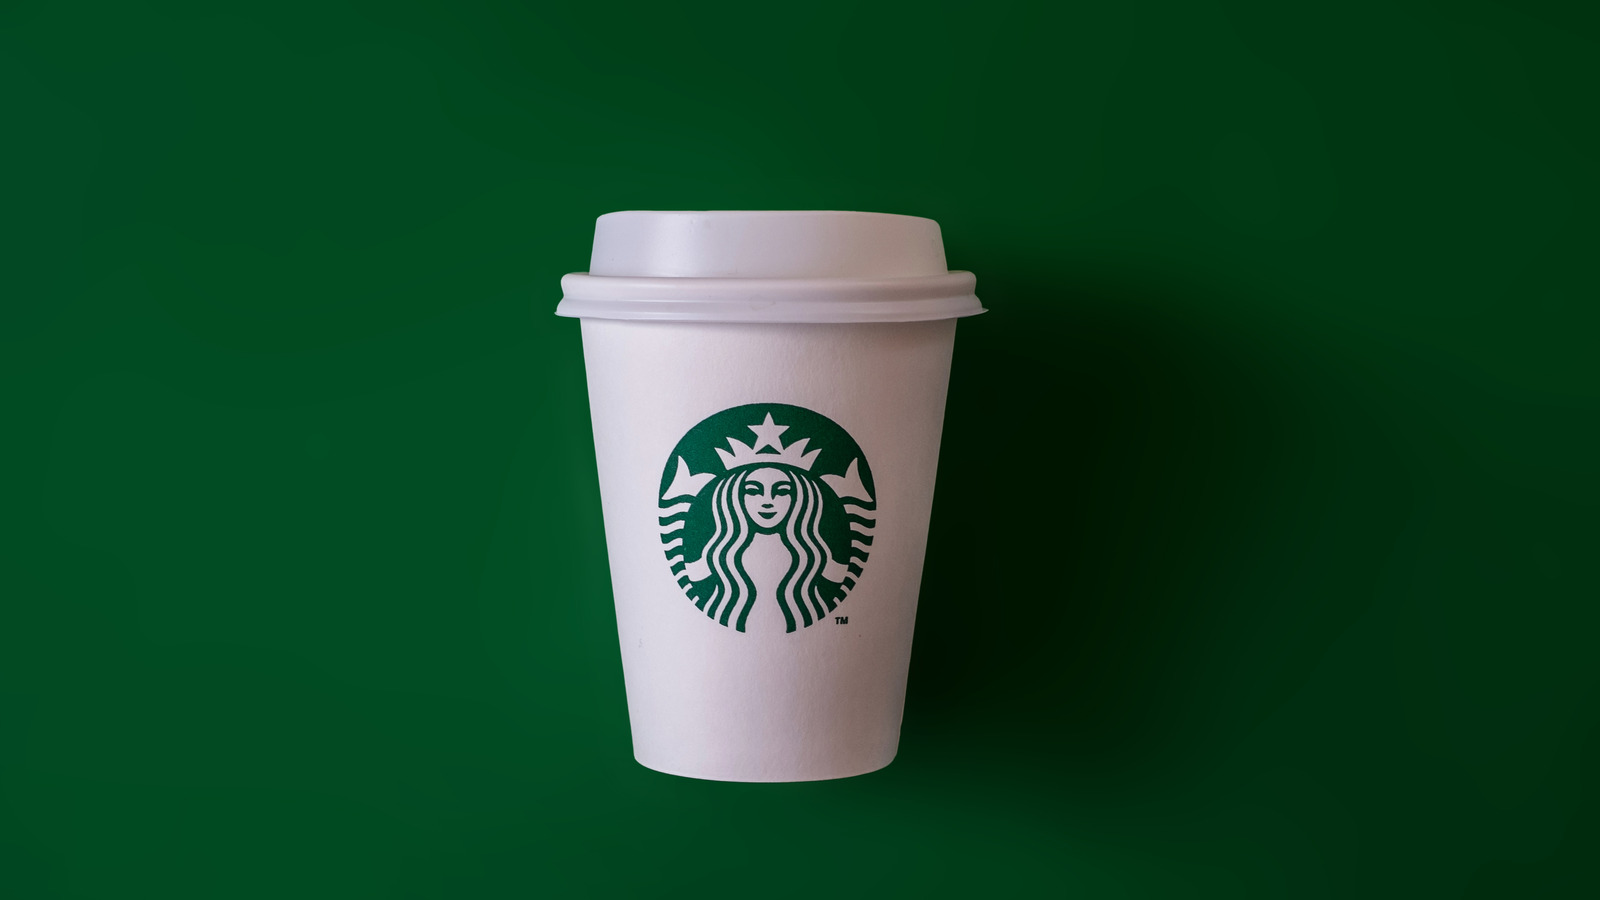 https://www.tastingtable.com/img/gallery/the-september-half-off-starbucks-deal-only-some-people-are-getting/l-intro-1663342291.jpg